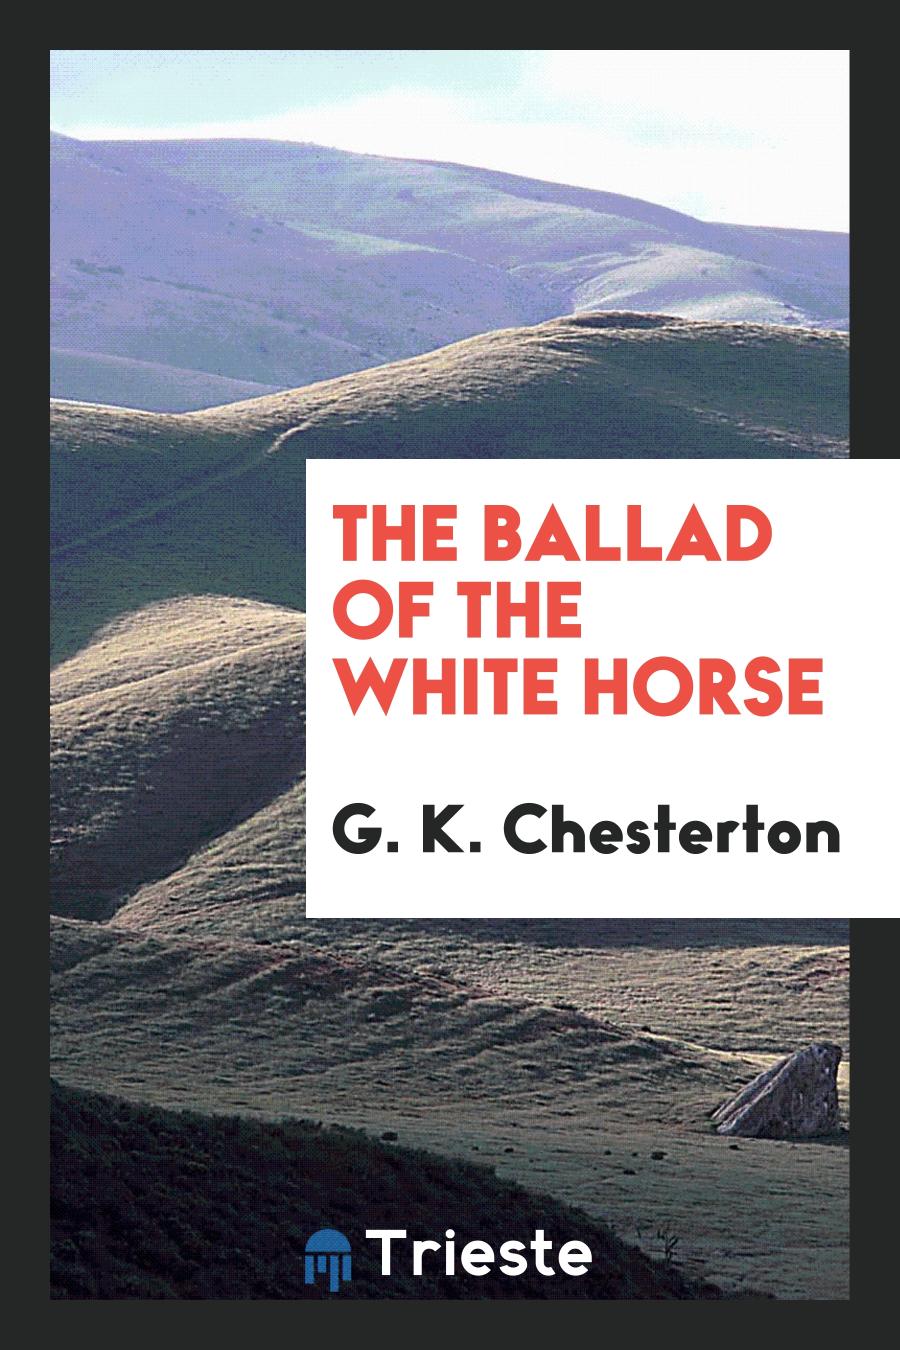 The ballad of the white horse